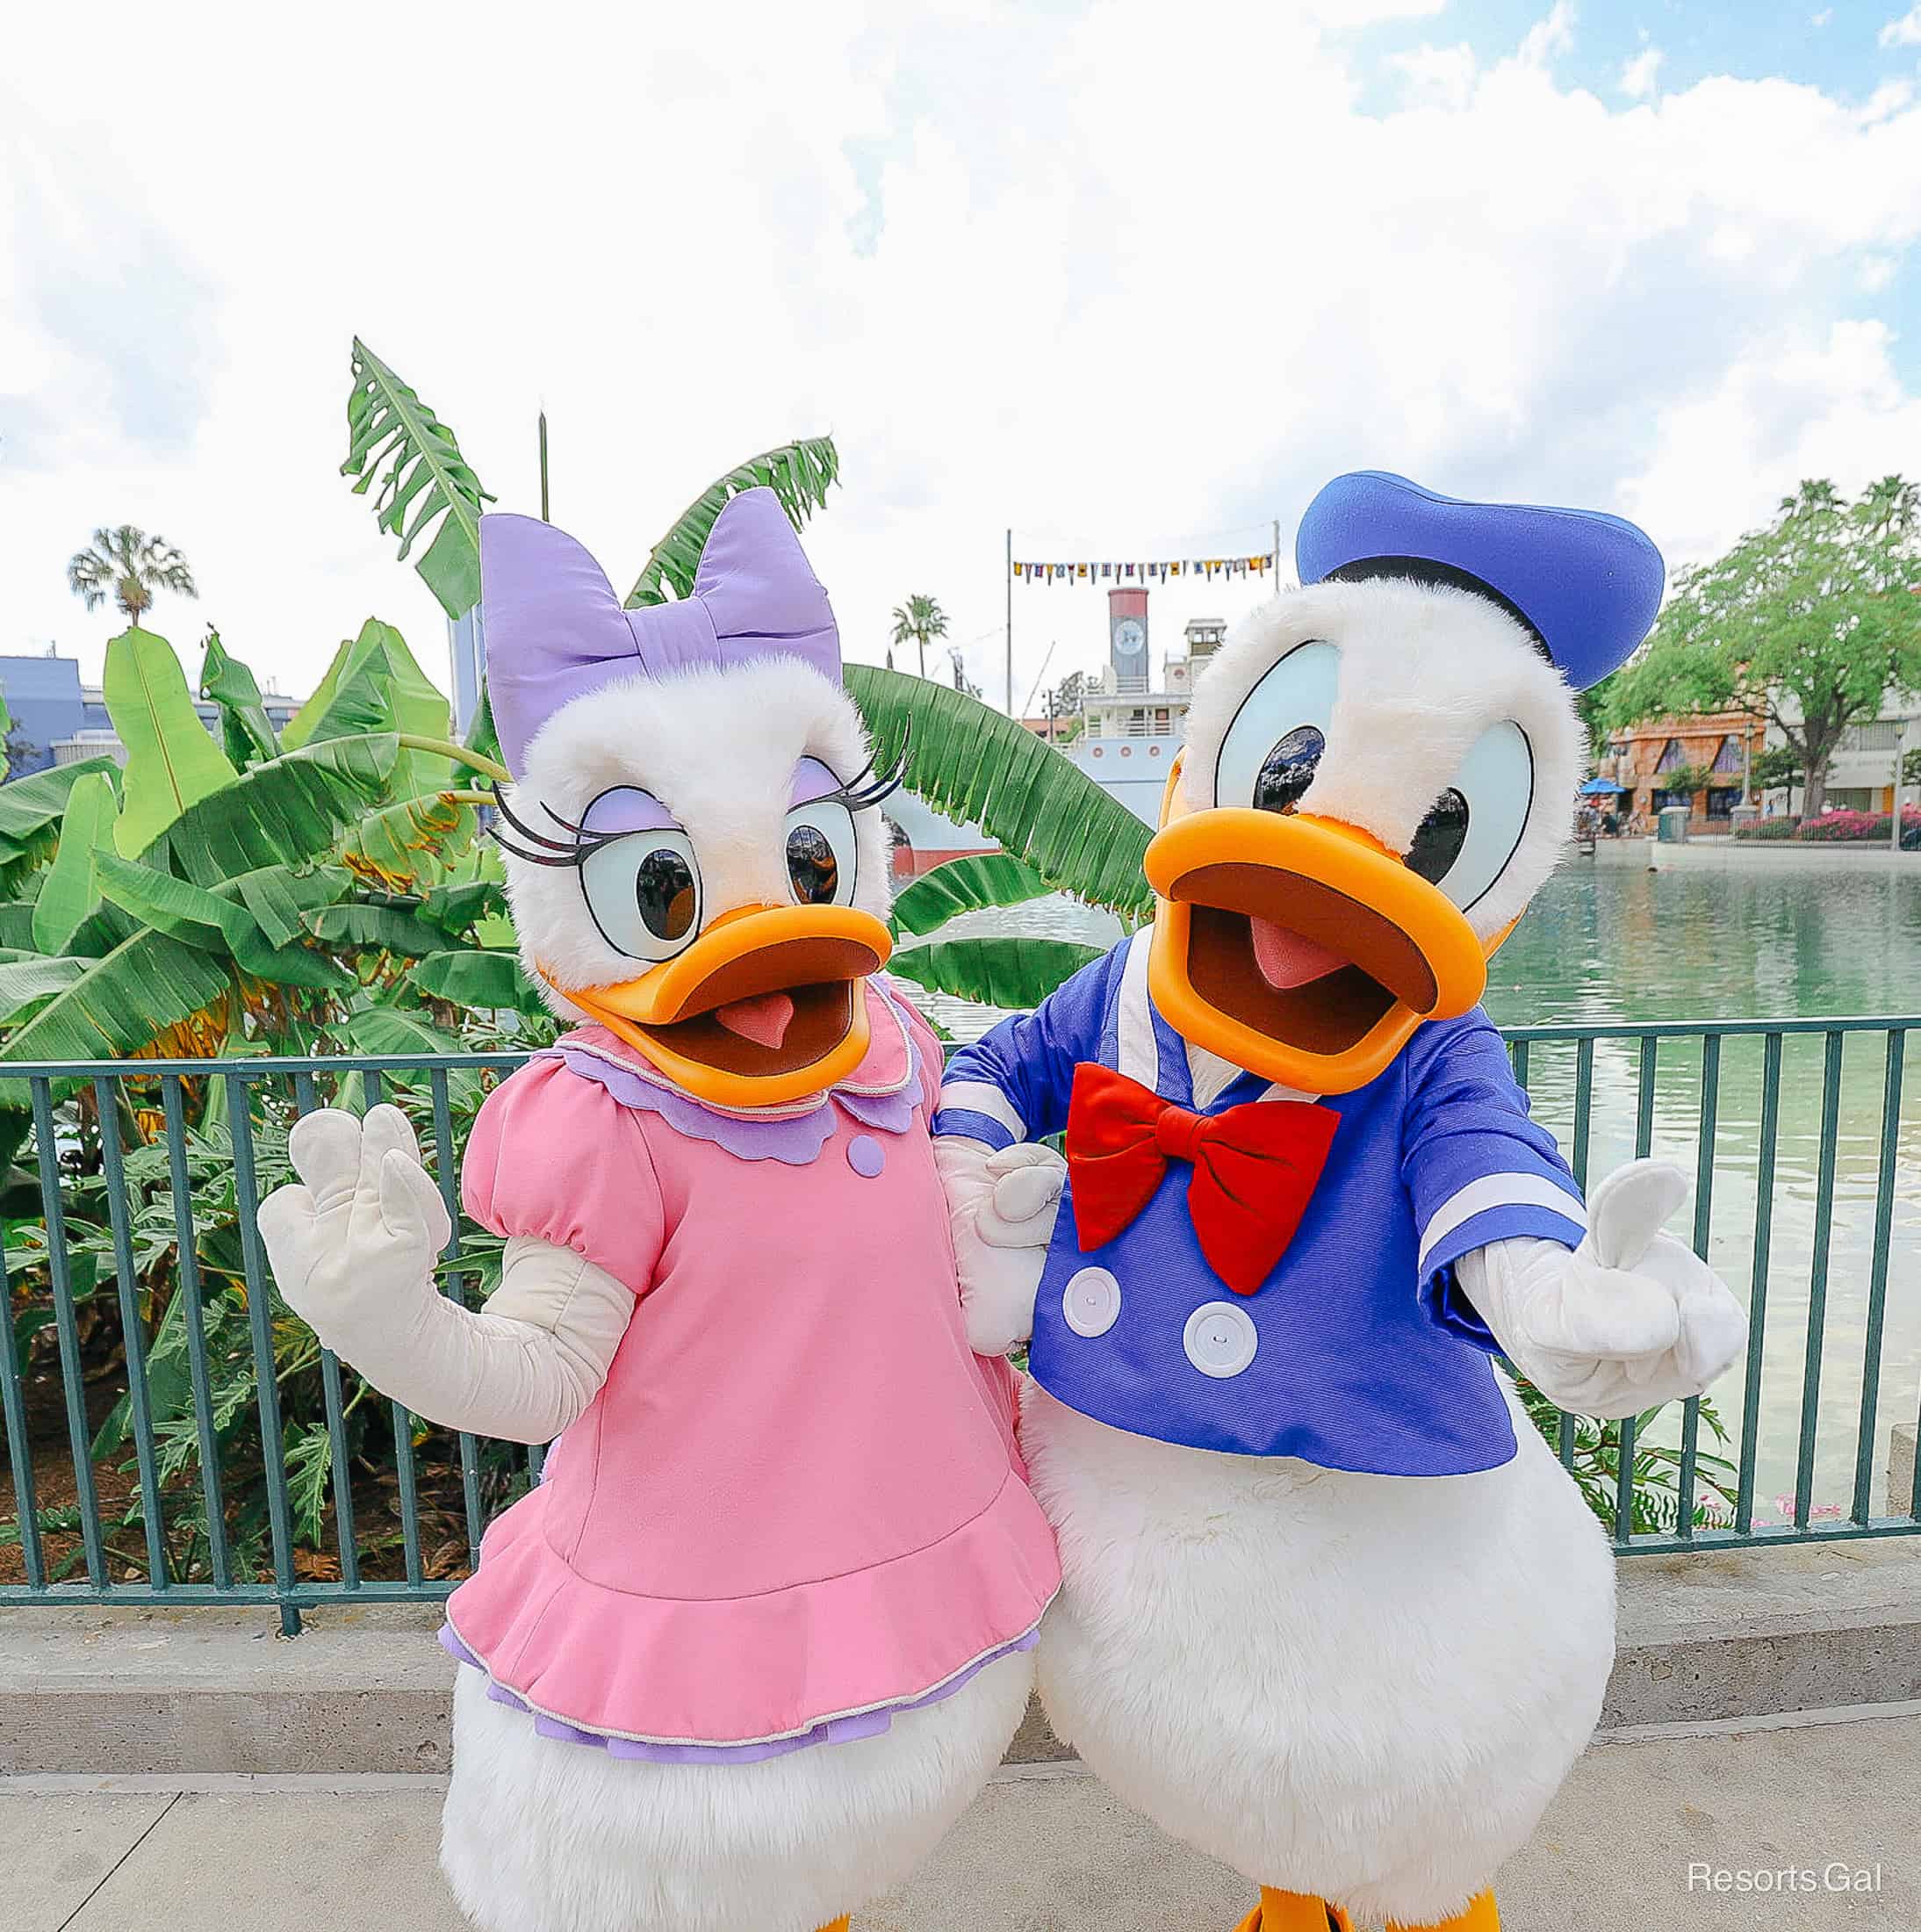 Donald poses with his number one and Daisy smiles. 